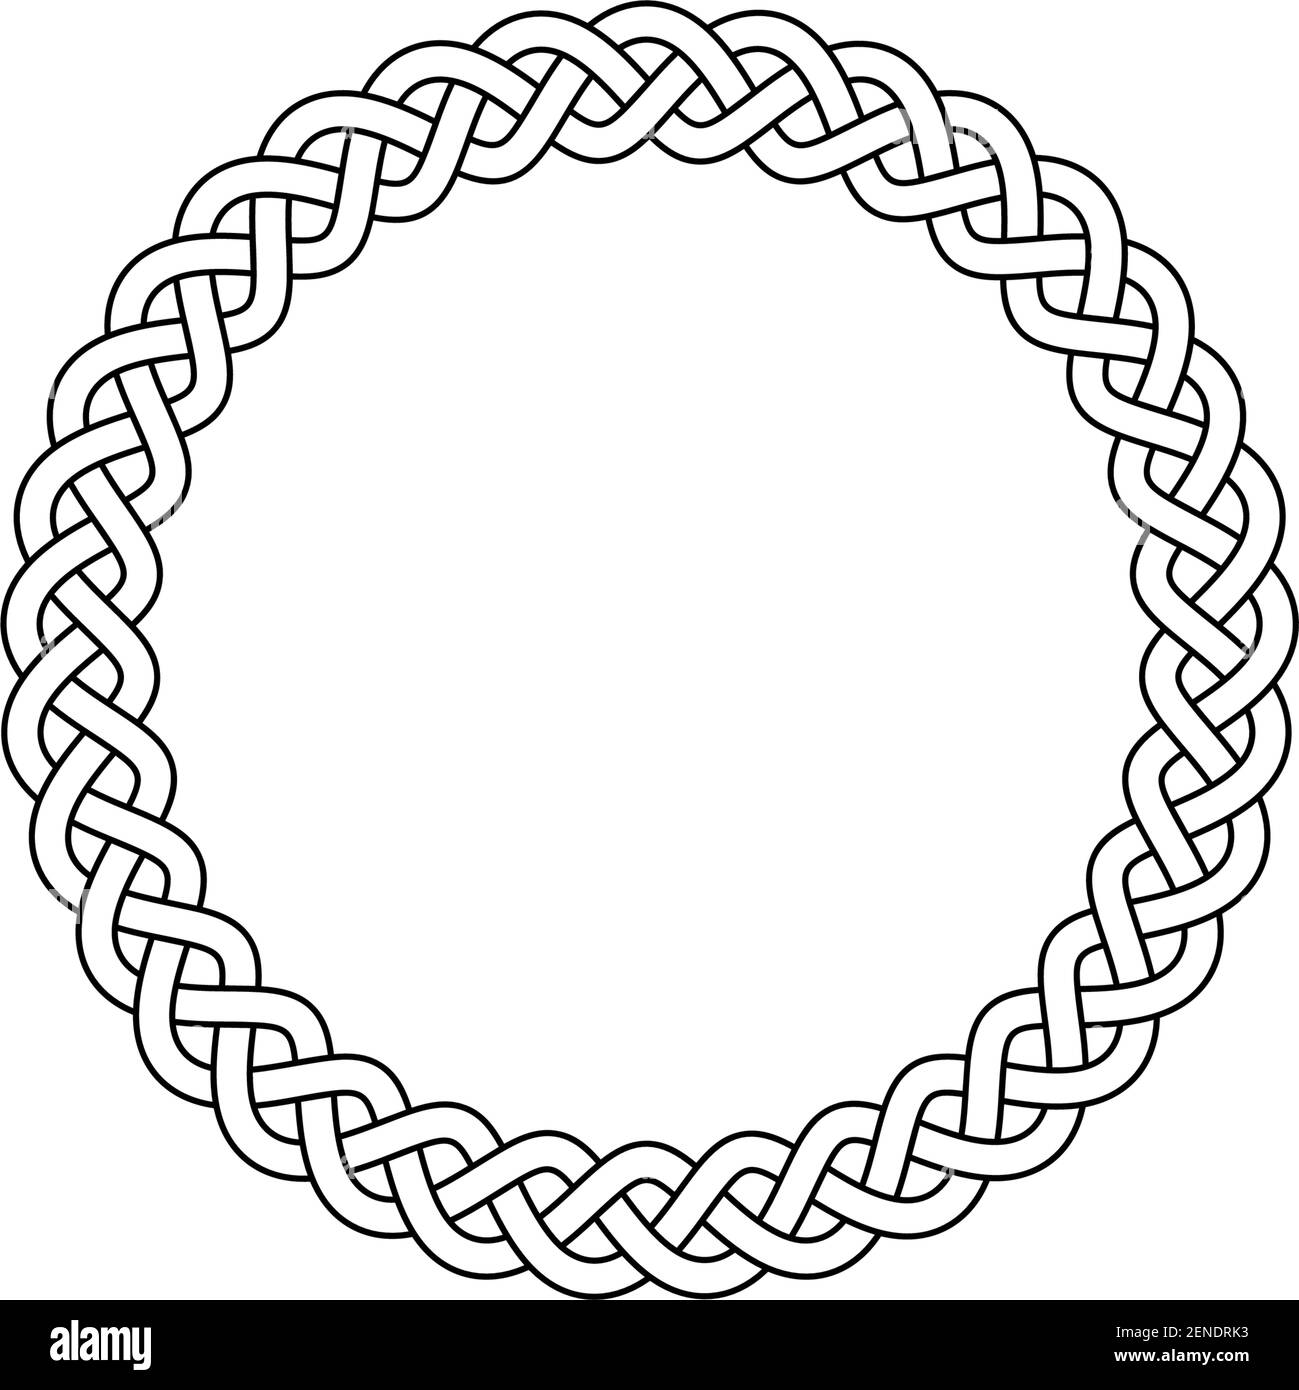 Ring with Celtic knot in black on a isolated white background. Abstract illustration of an celtic symbol. Stock Vector